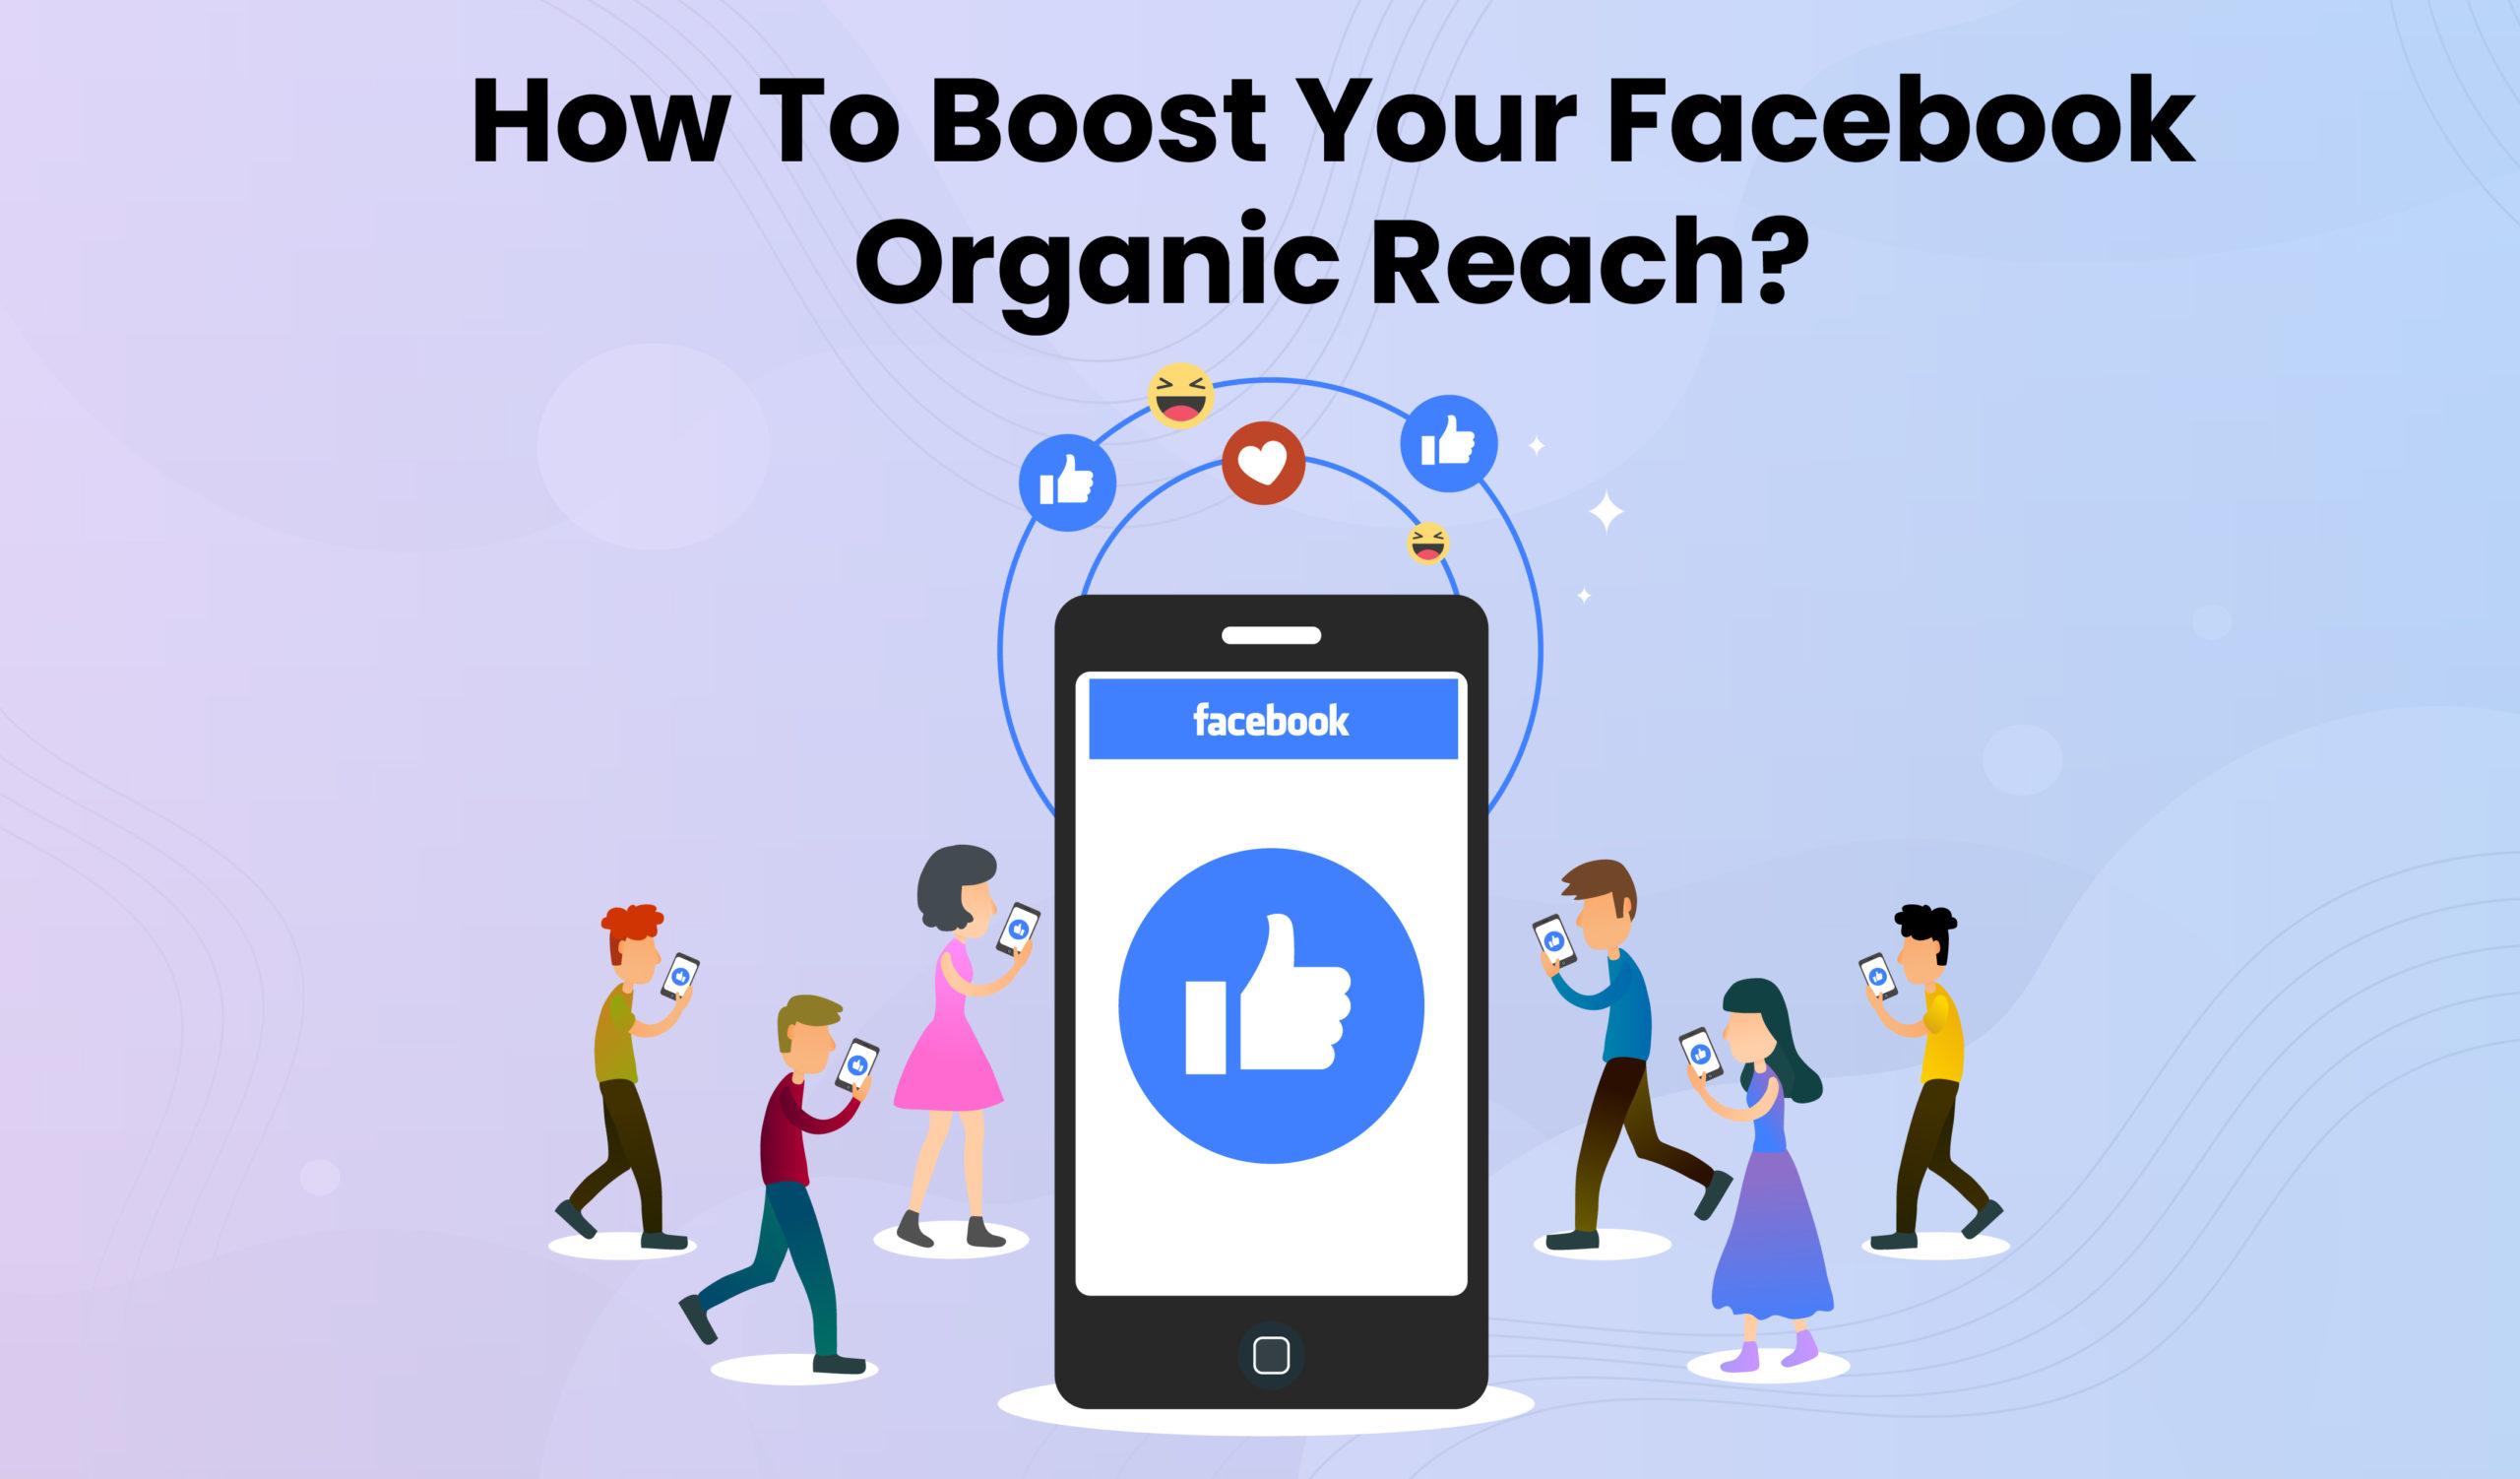 How to boost your Facebook organic reach?